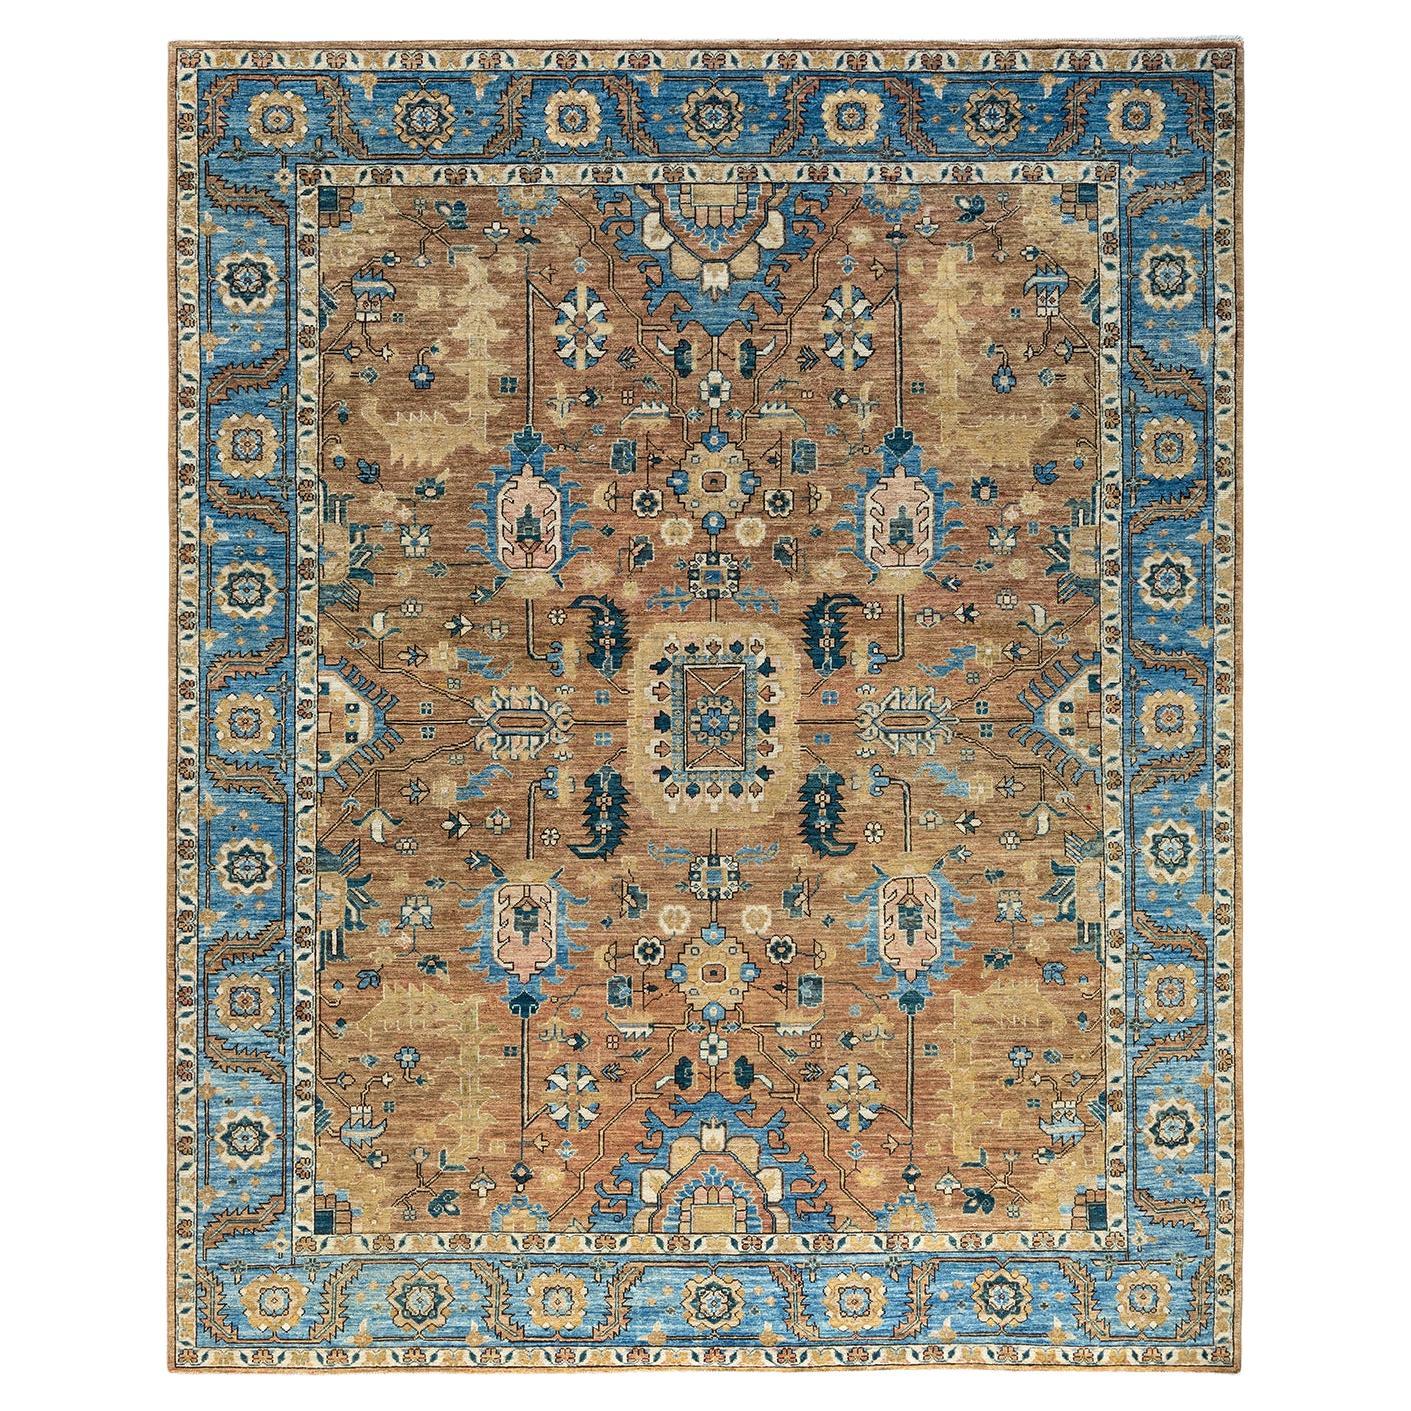 Traditional Serapi Hand Knotted Wool Brown Area Rug